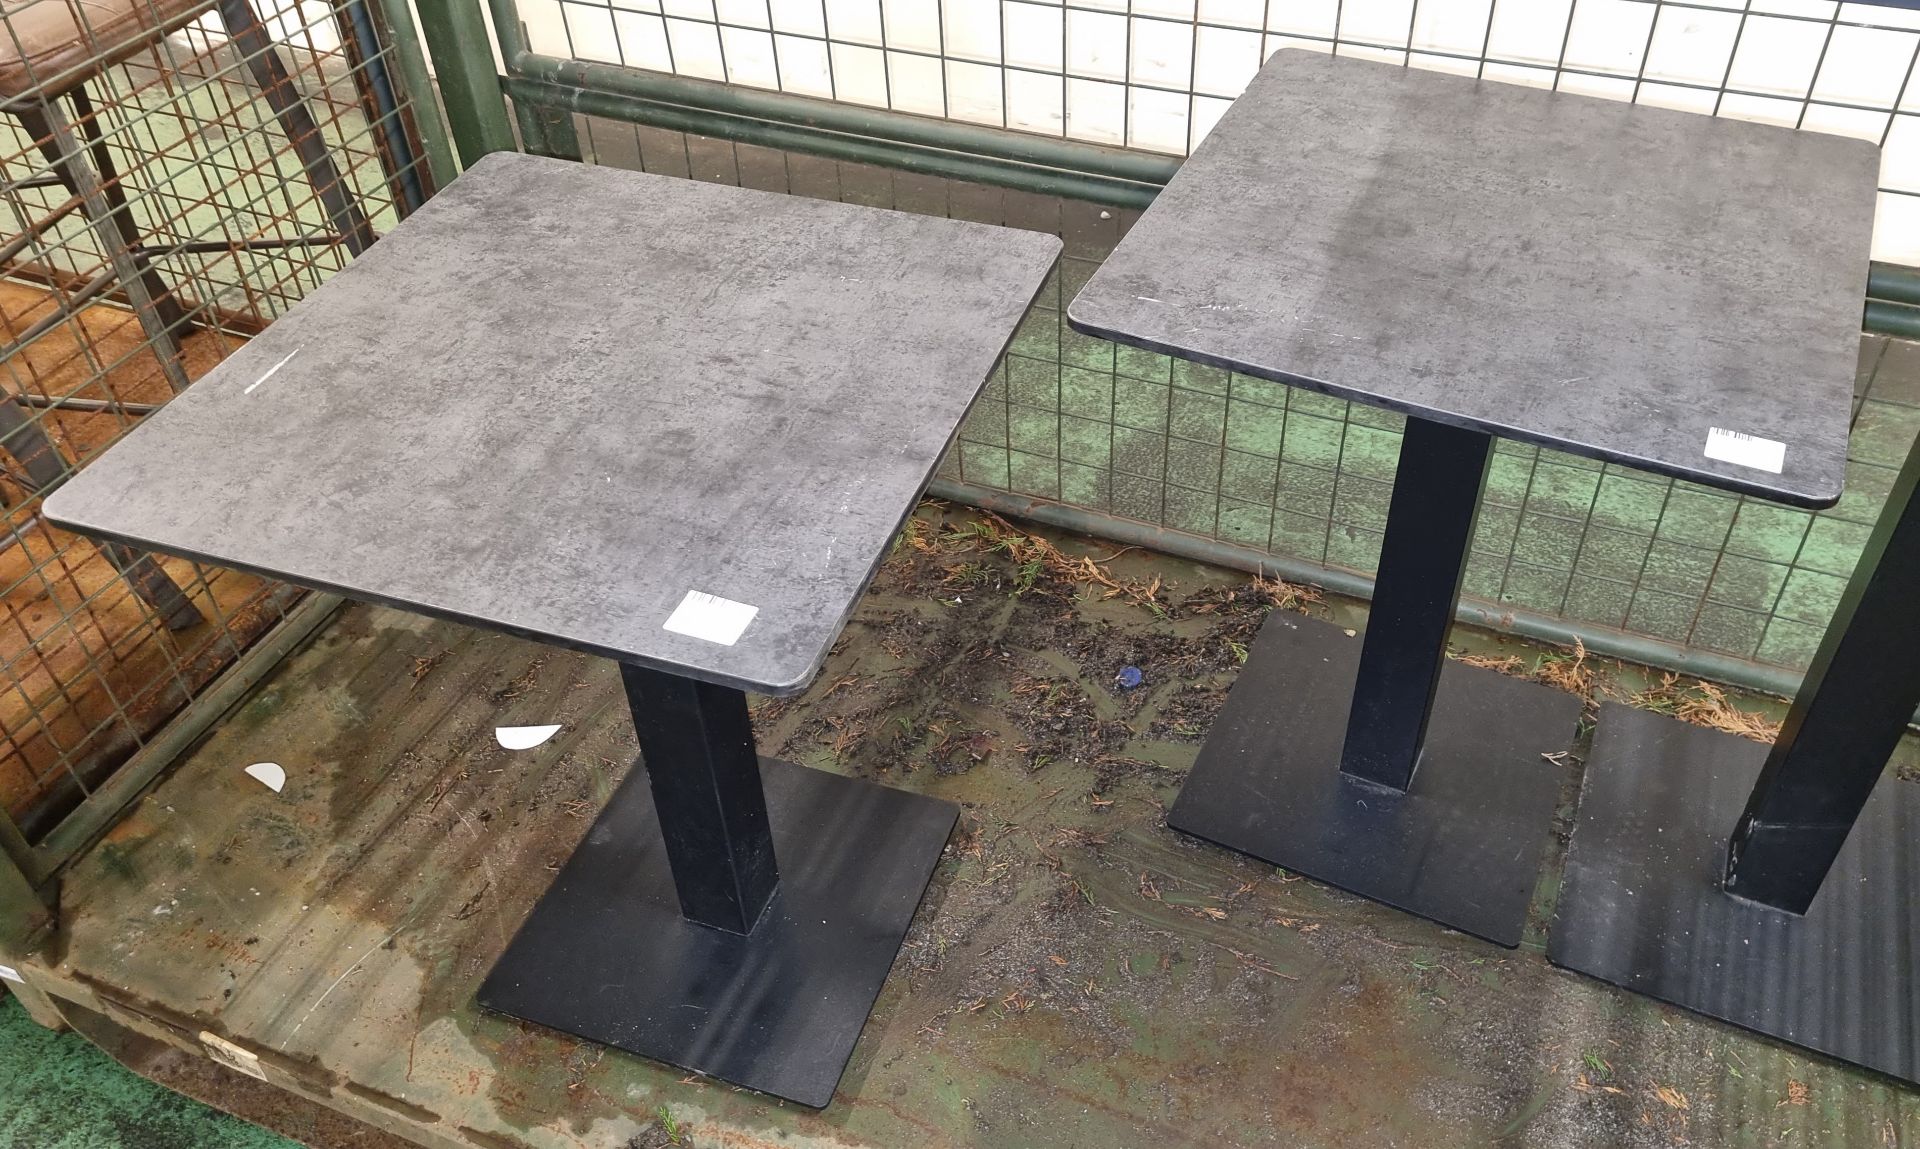 11x Extrema tables - see description for details - Image 5 of 6